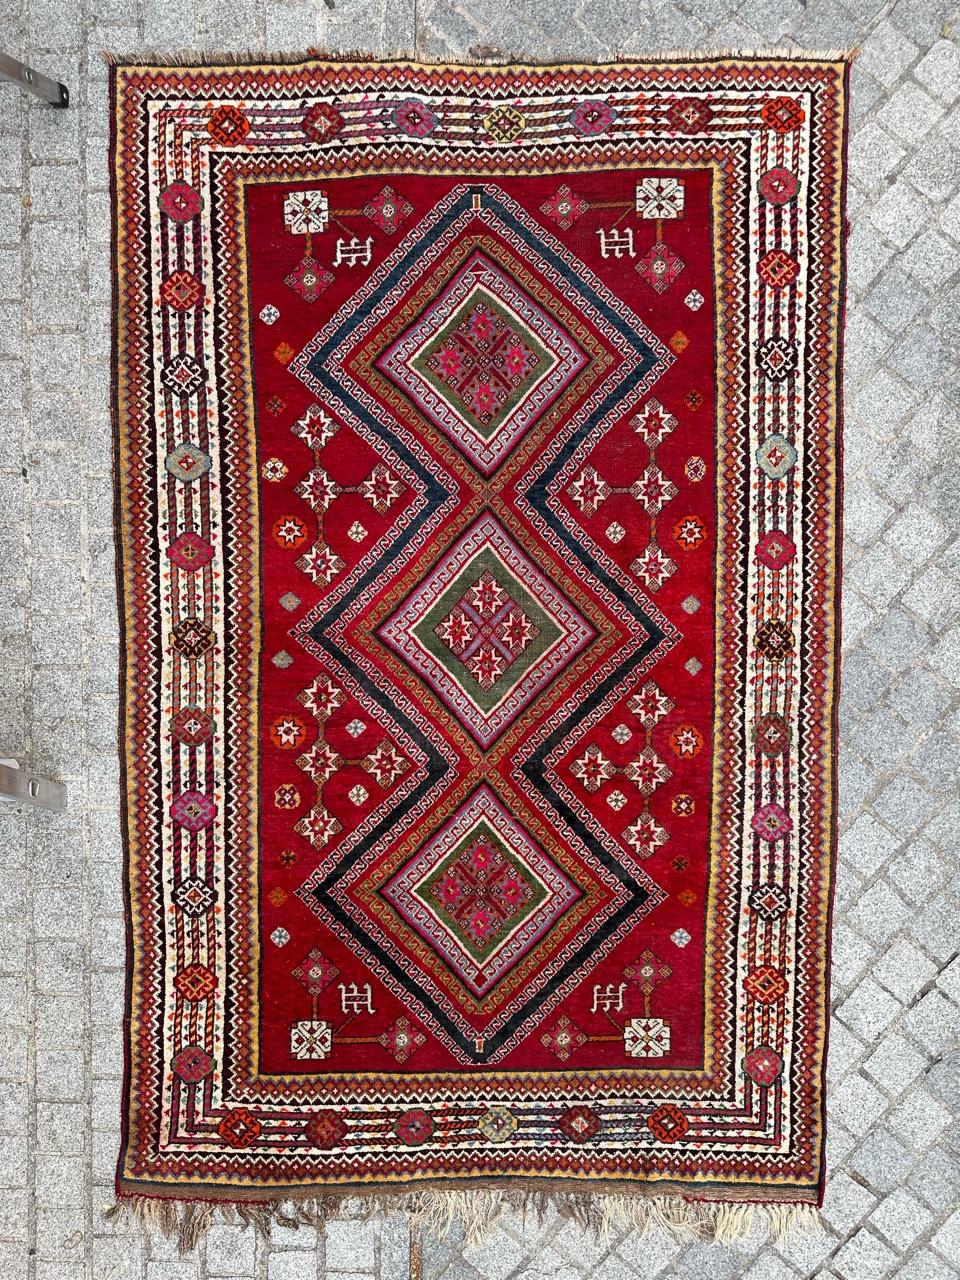 Nice antique ghashghai rug entirely hand knotted with wool velvet on wool foundation.
Immerse yourself in history and art with this exquisite early 20th century antique rug. Featuring captivating tribal and geometric patterns combined with stylized